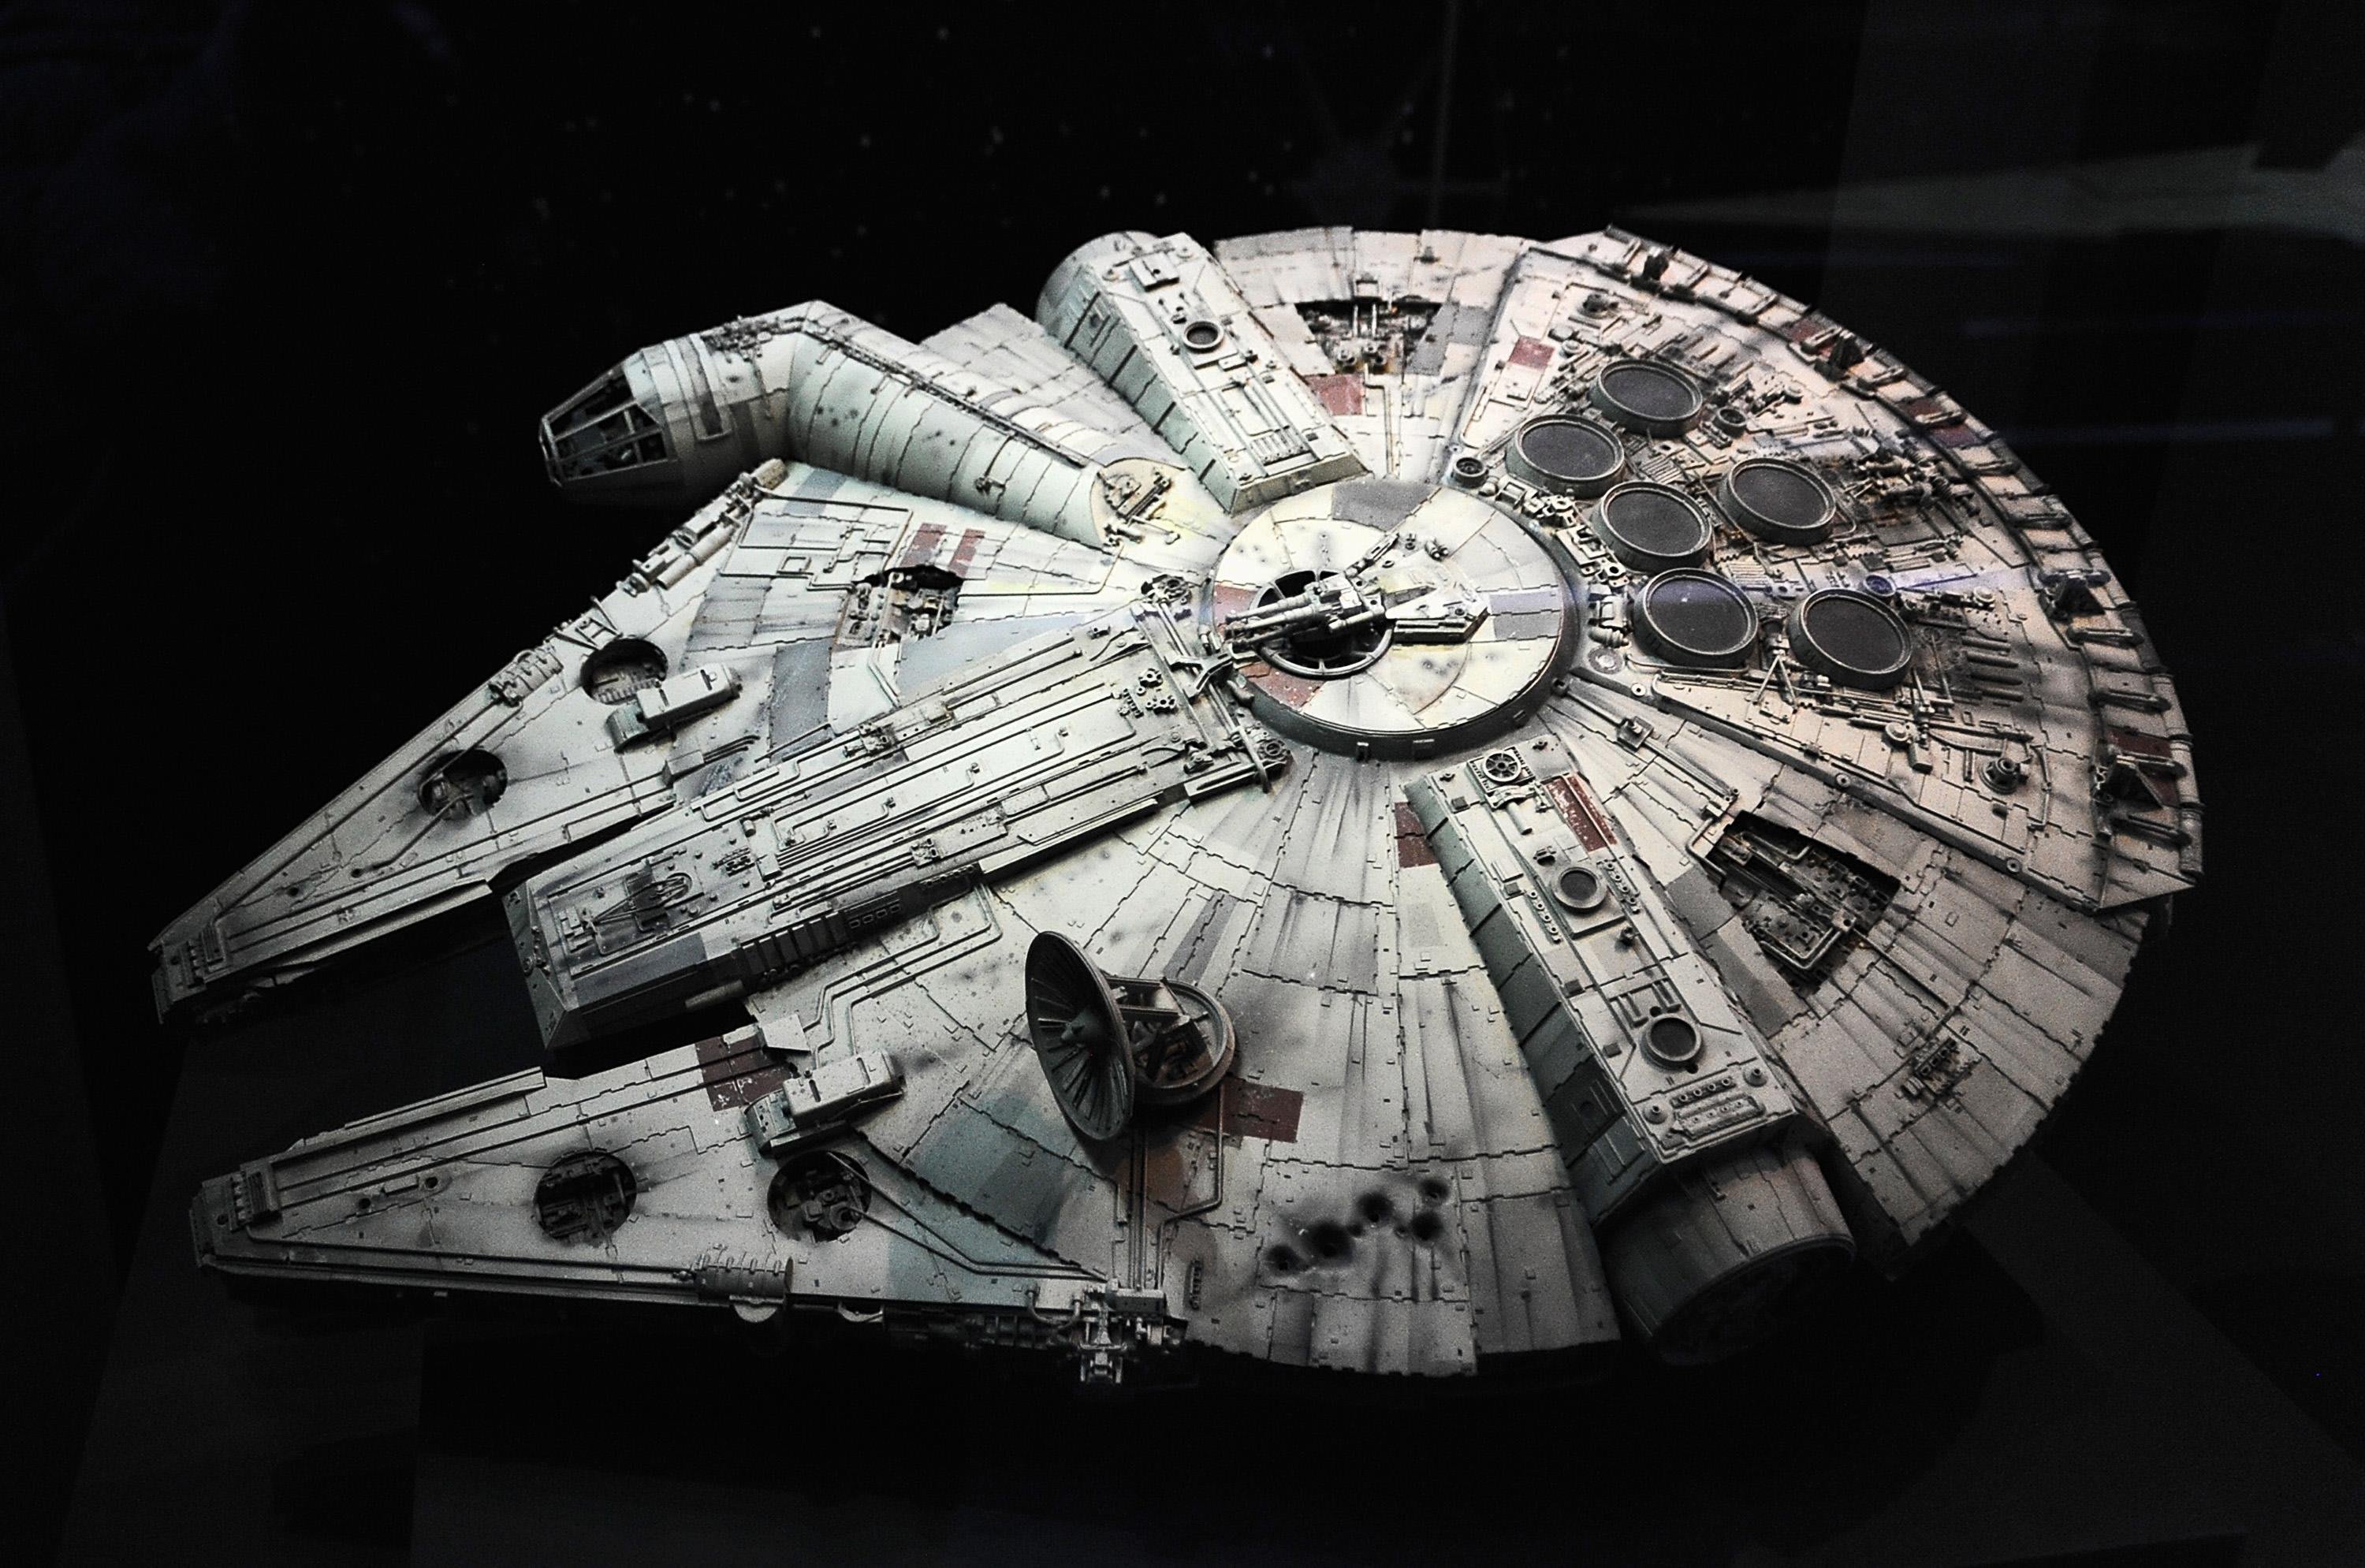 Star Wars: The spaceships that made you dream